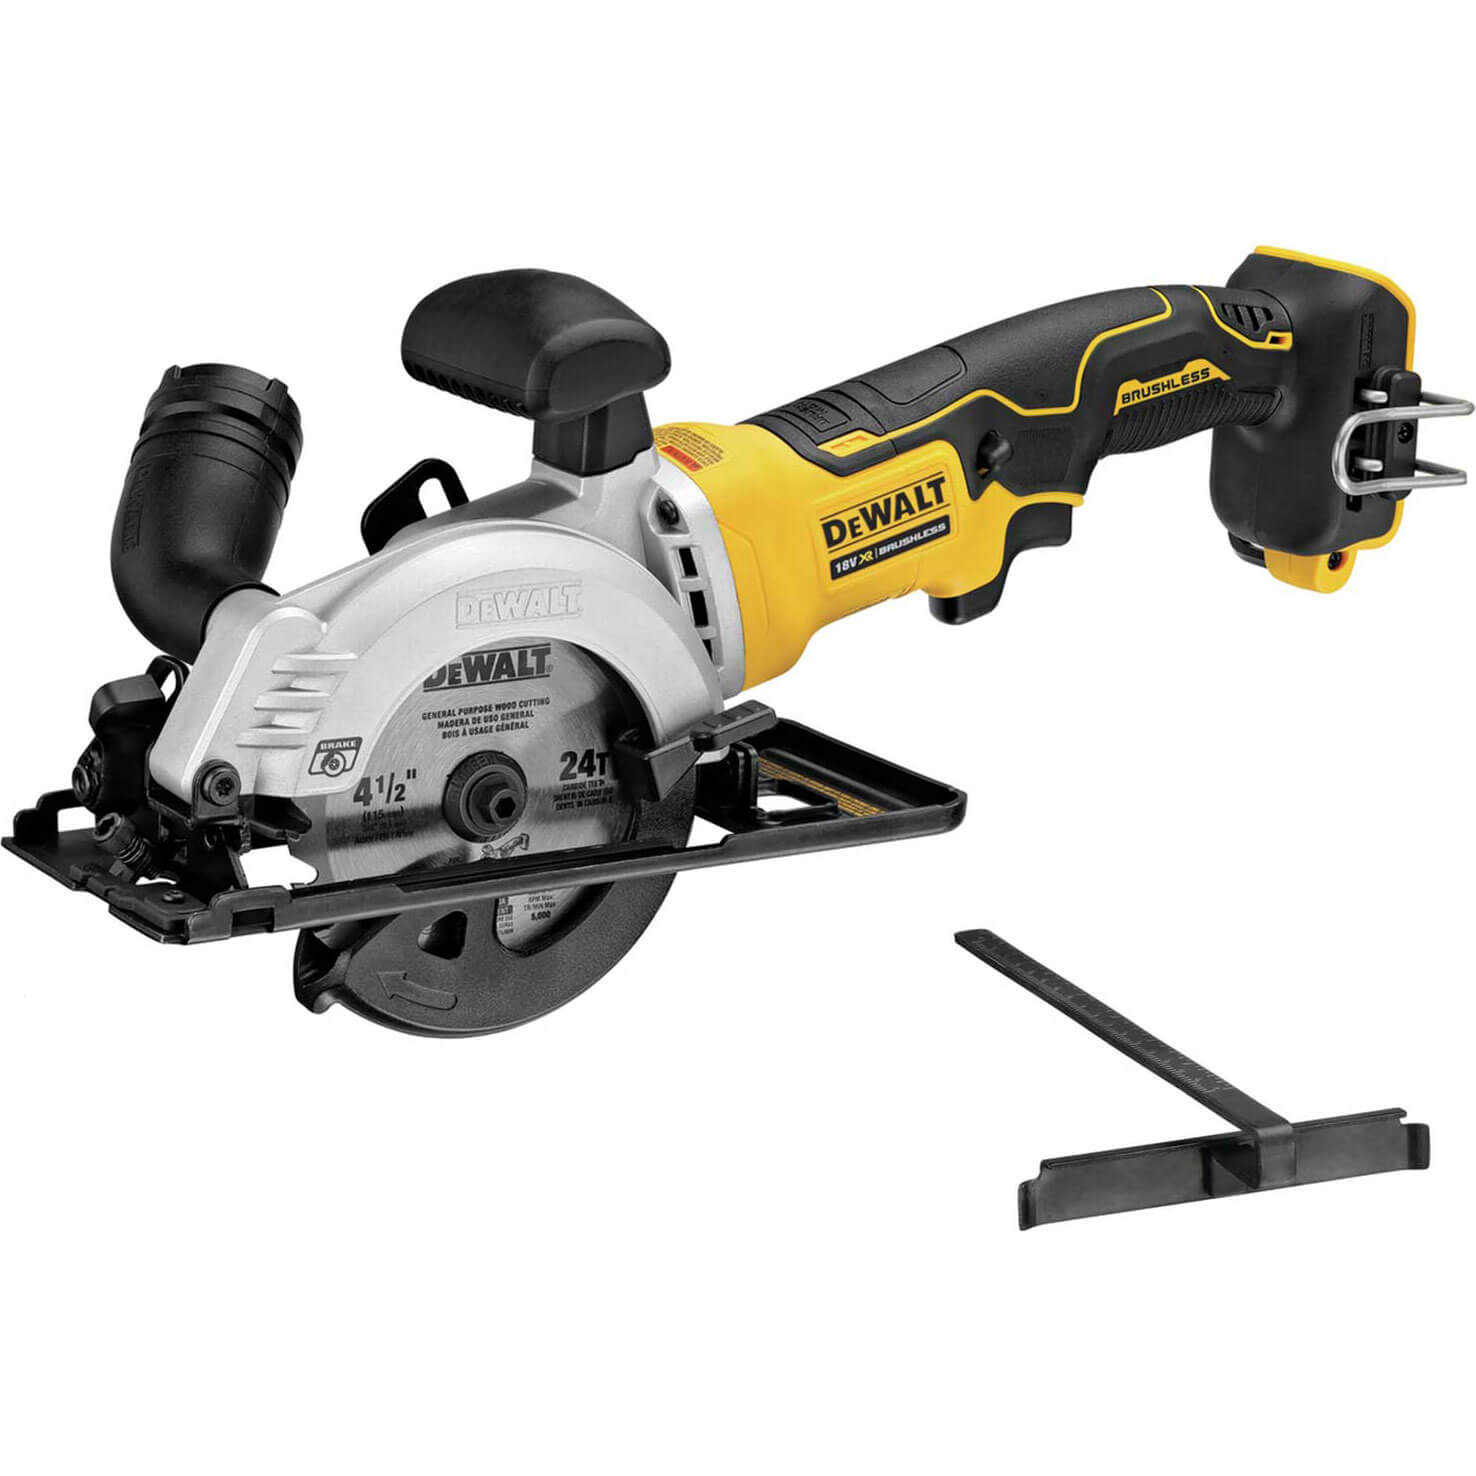 Image of DeWalt DCS571 18v XR Brushless Compact Circular Saw 115mm No Batteries No Charger No Case